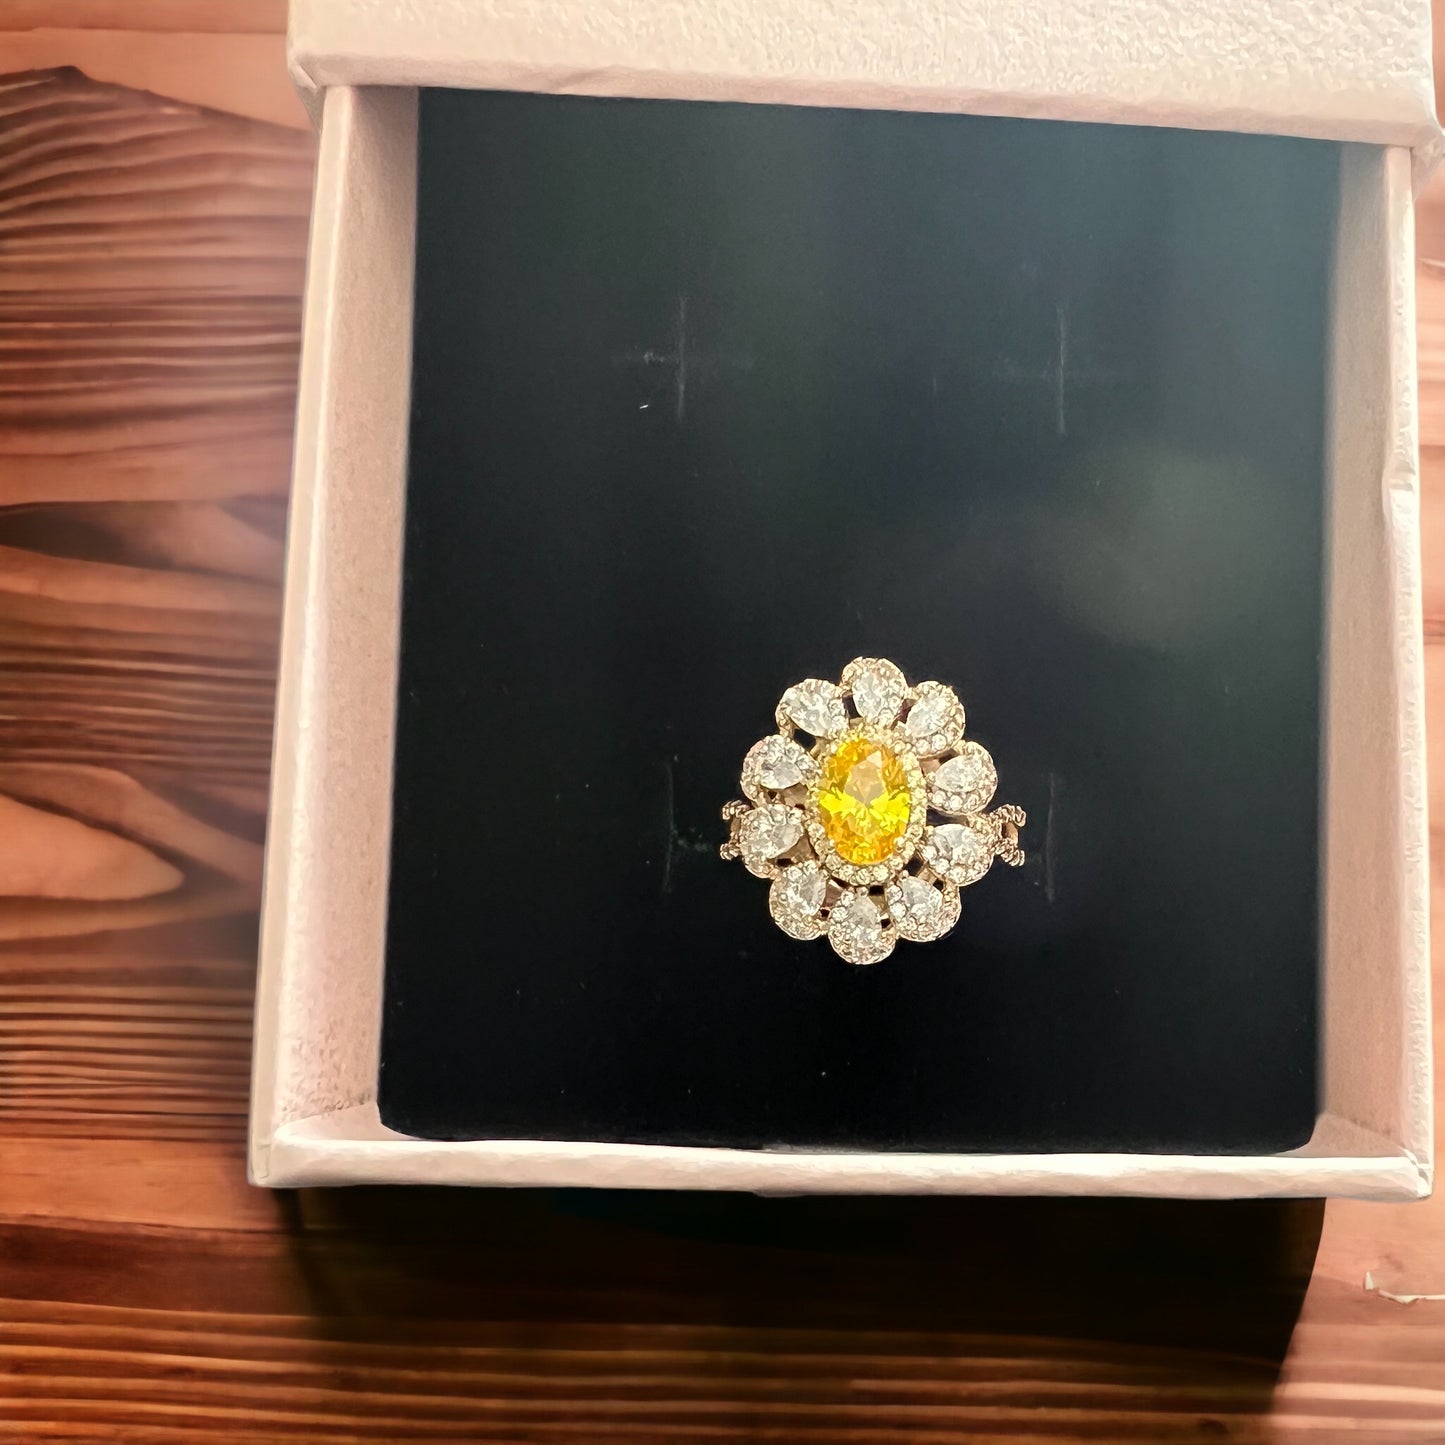 New Zircons Flower Design Gold Rings Available In 6 Colors